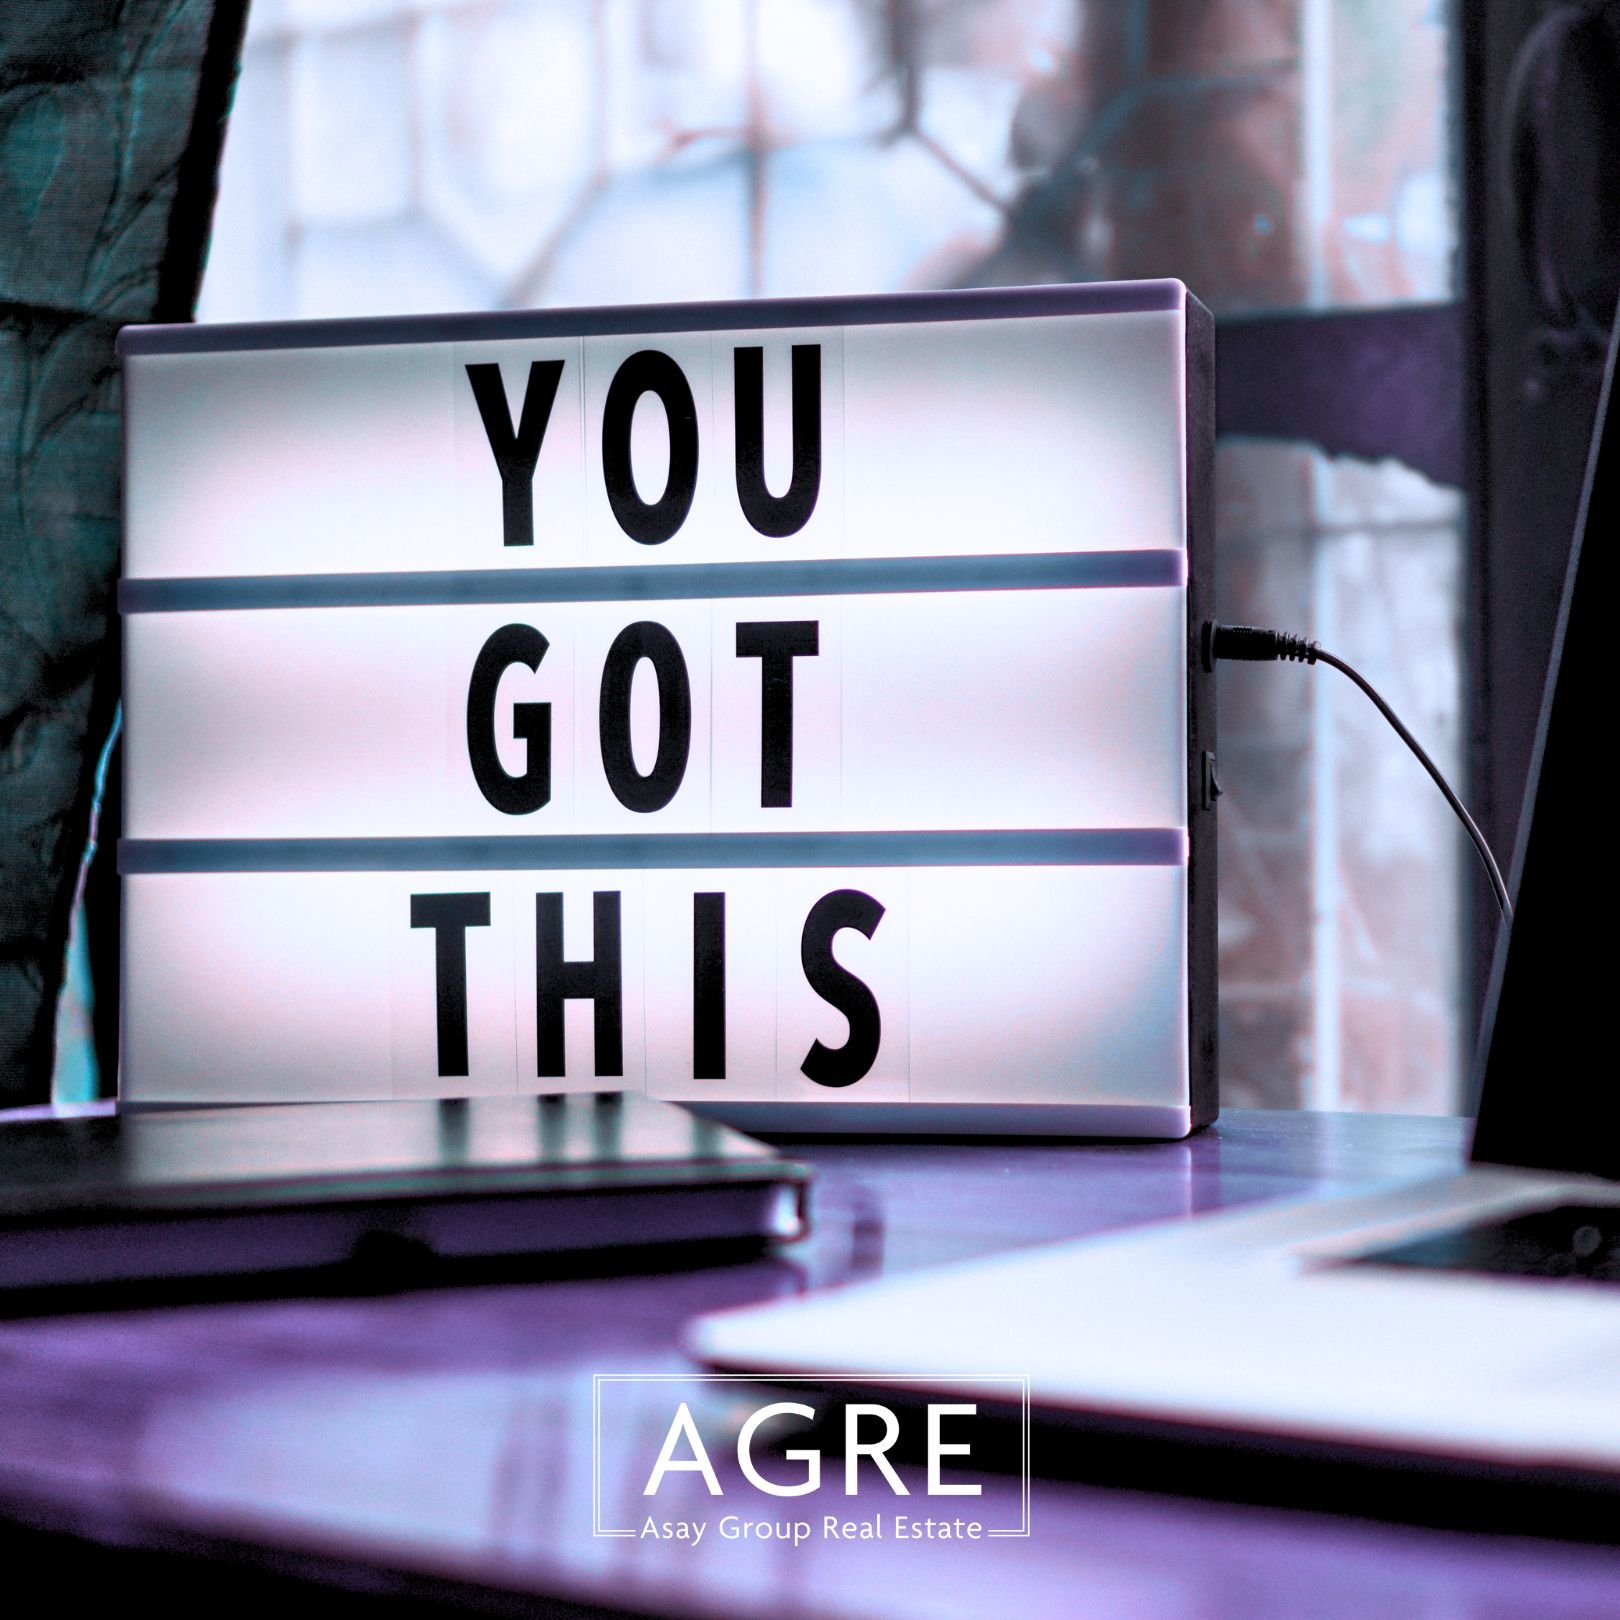 This is your sign that you can handle anything this week throws your way. #mondaymotivation #yougotthis 

#agre #asaygrouprealestate #realestatetips #fortworth #thisisfortworth #mortgagetips #fortworthlenders #kateasay #katesellsdfw #katesellsfortwor